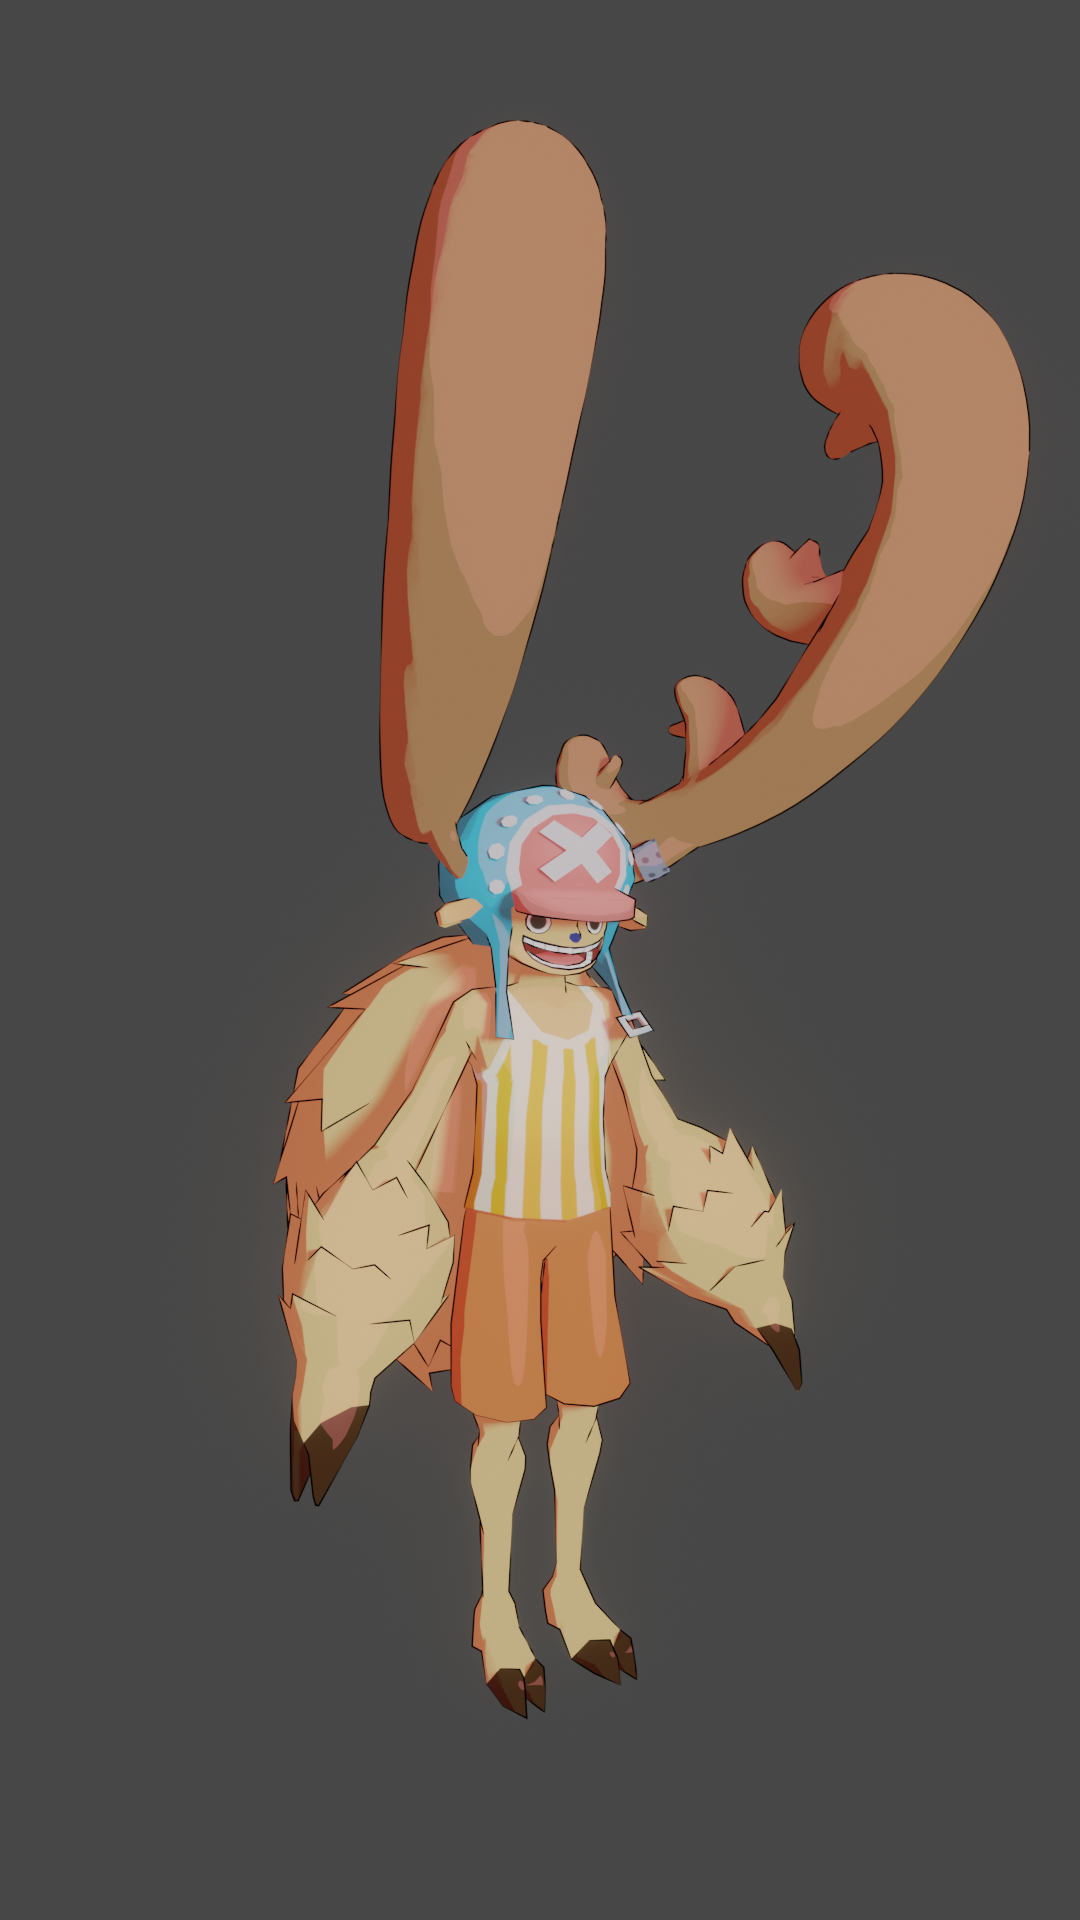 Chopper monster point by clavode4 on DeviantArt